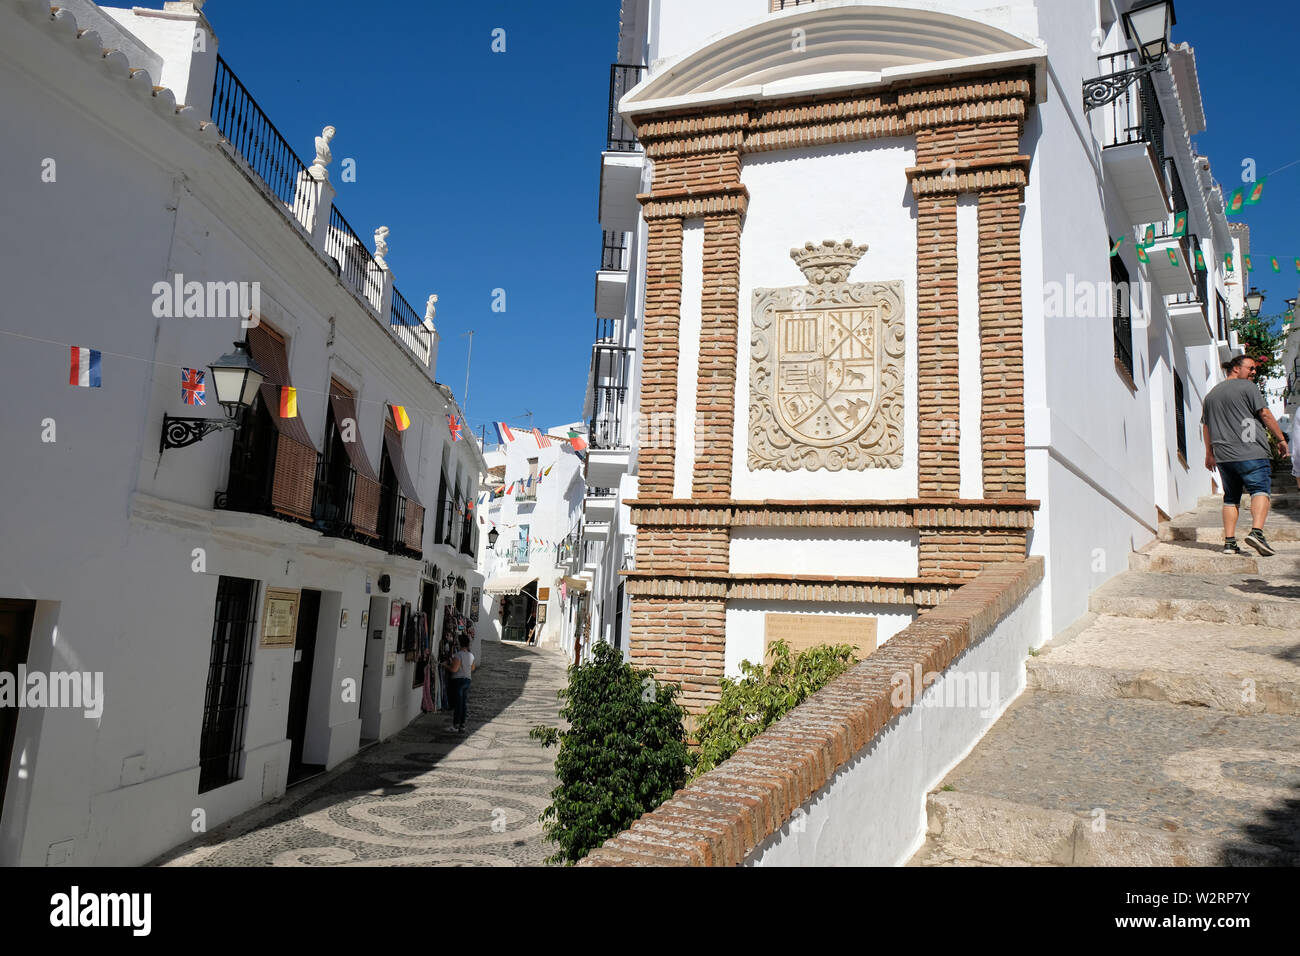 The Montellano coat of arms; Frigiliana, Province of Málaga, Andalusia, Spain; whitewashed walls with a banner with flags of many European countries. Stock Photo